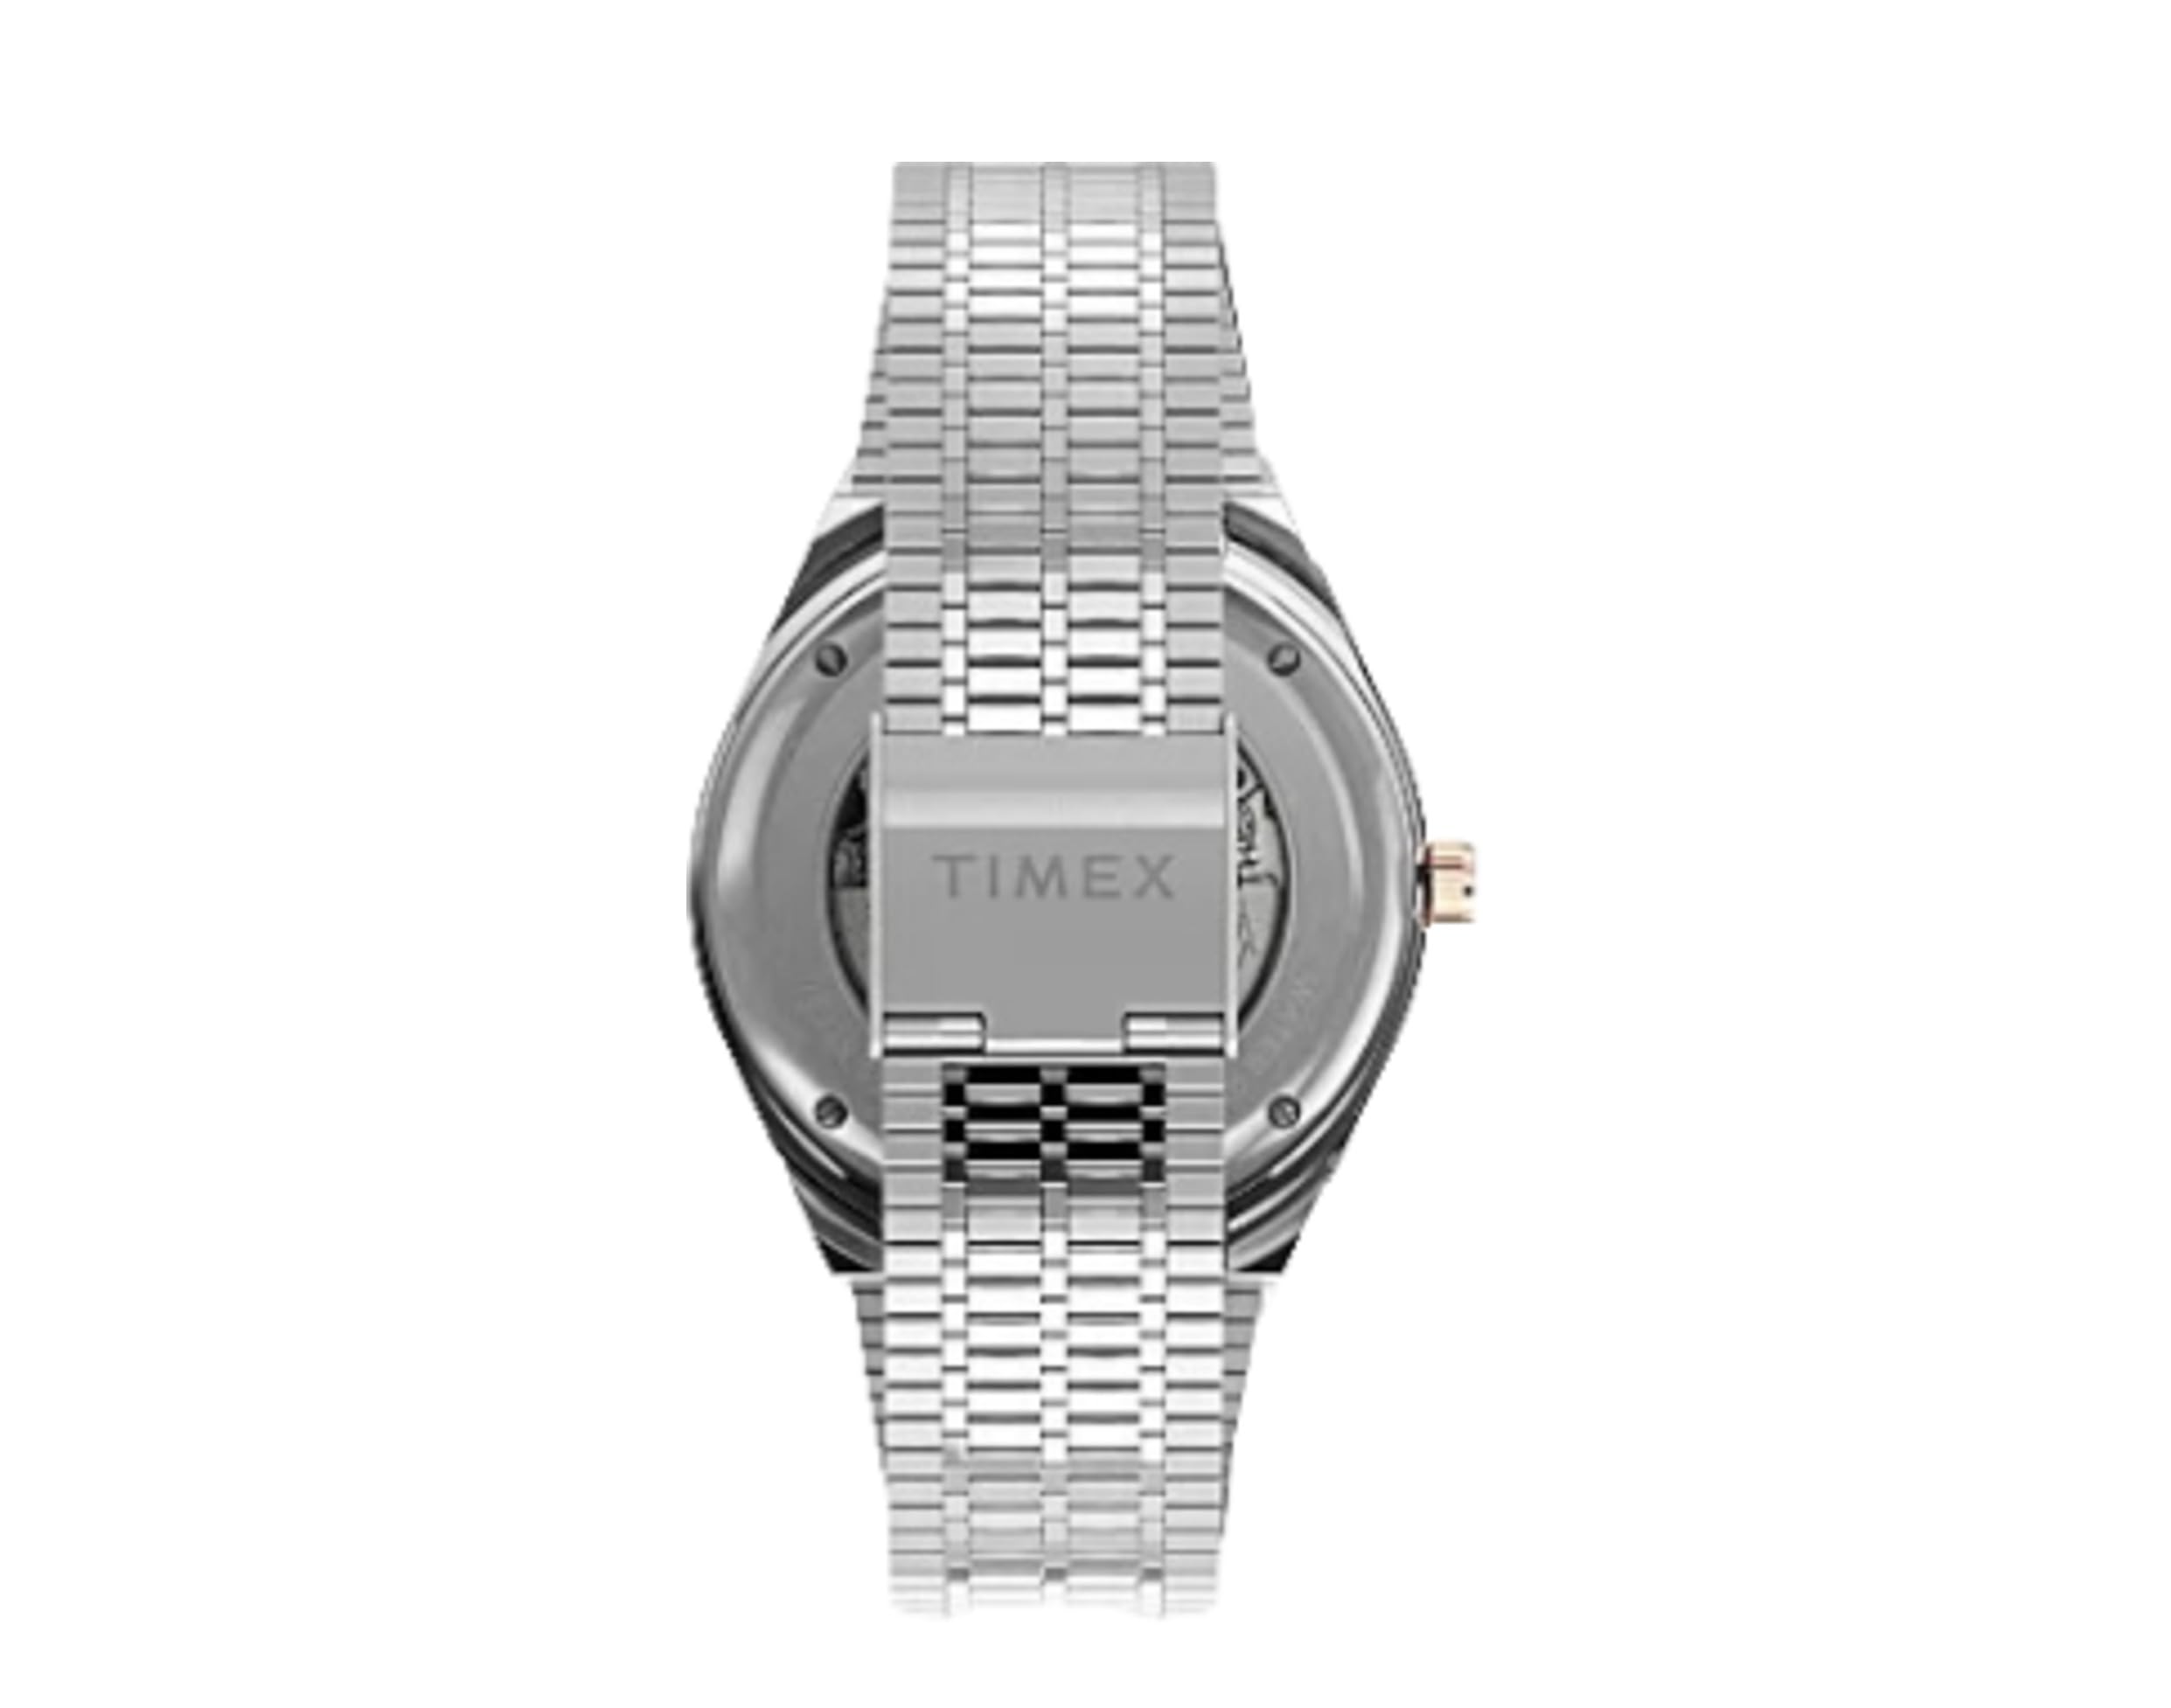 Timex Men's M79 Automatic 40mm Watch